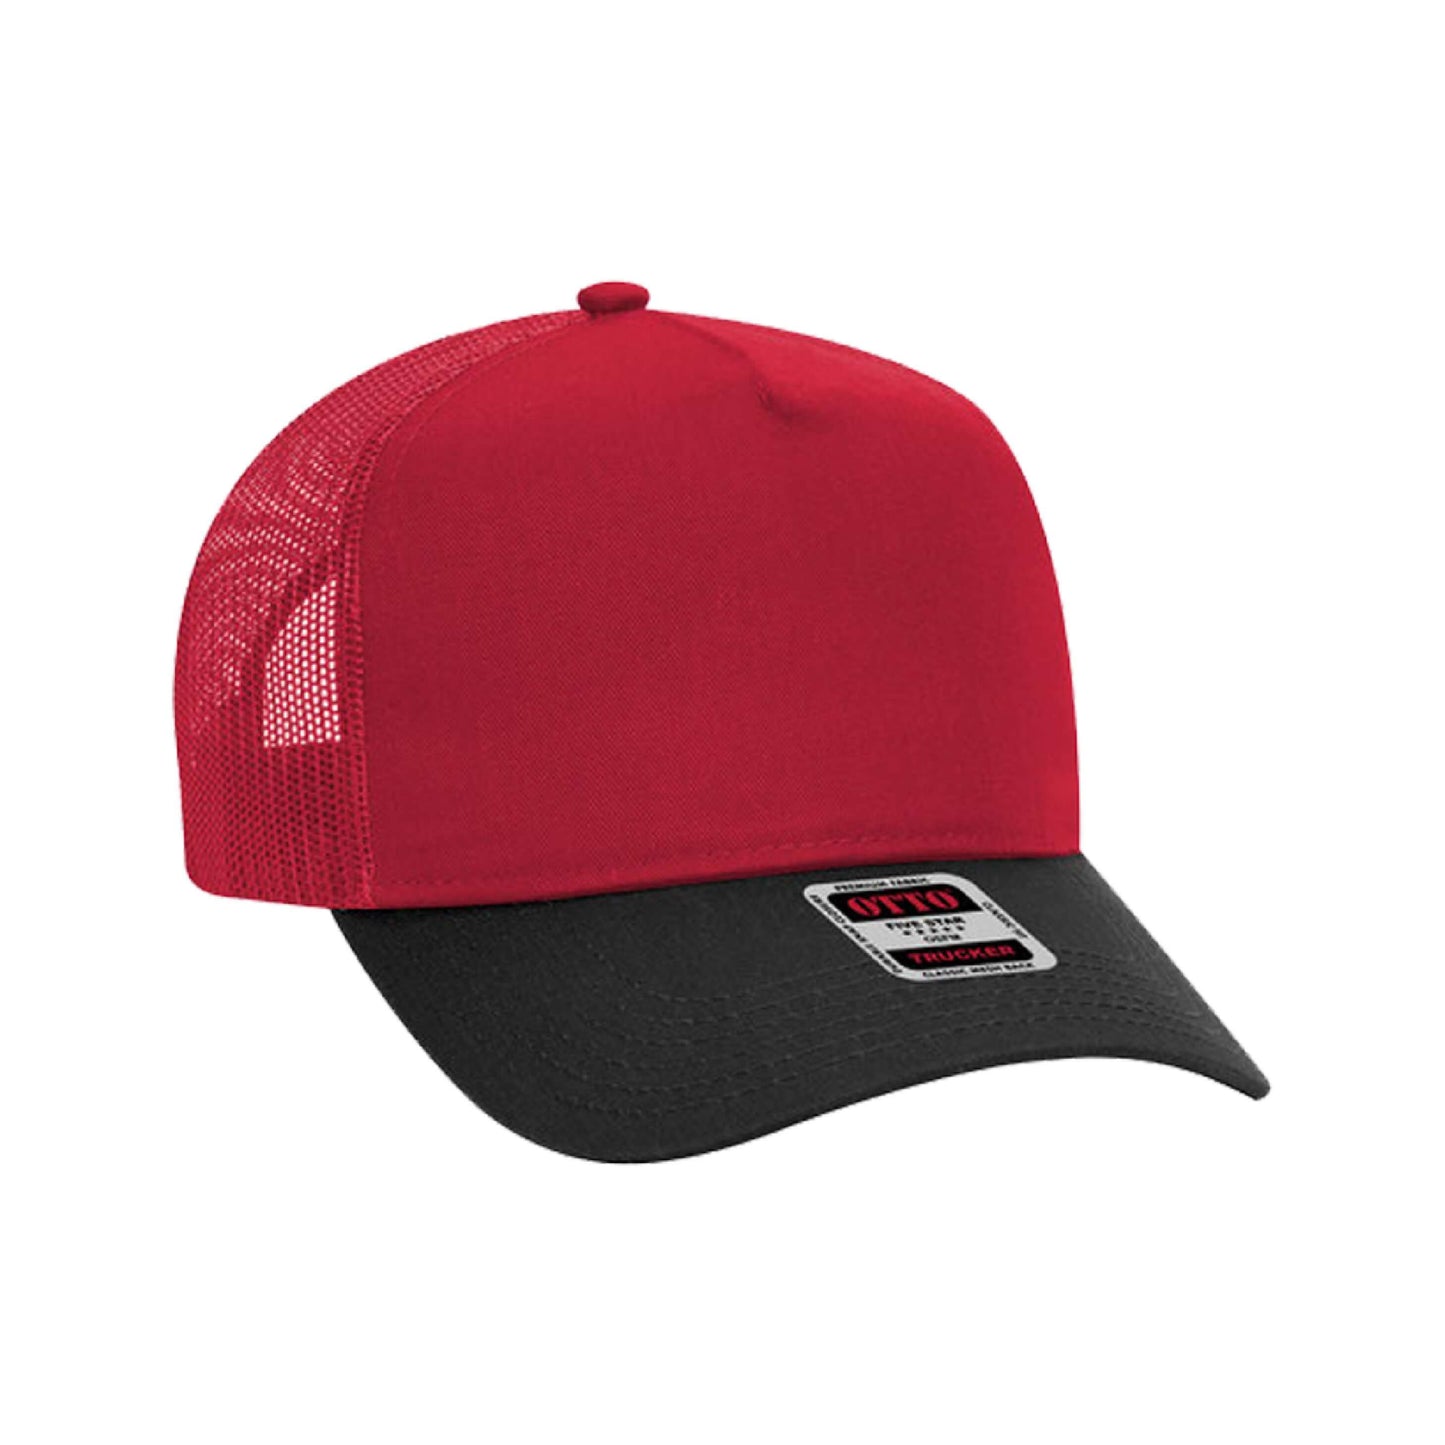 5 Panel Mid Profile Mesh Back Structured Trucker Hat